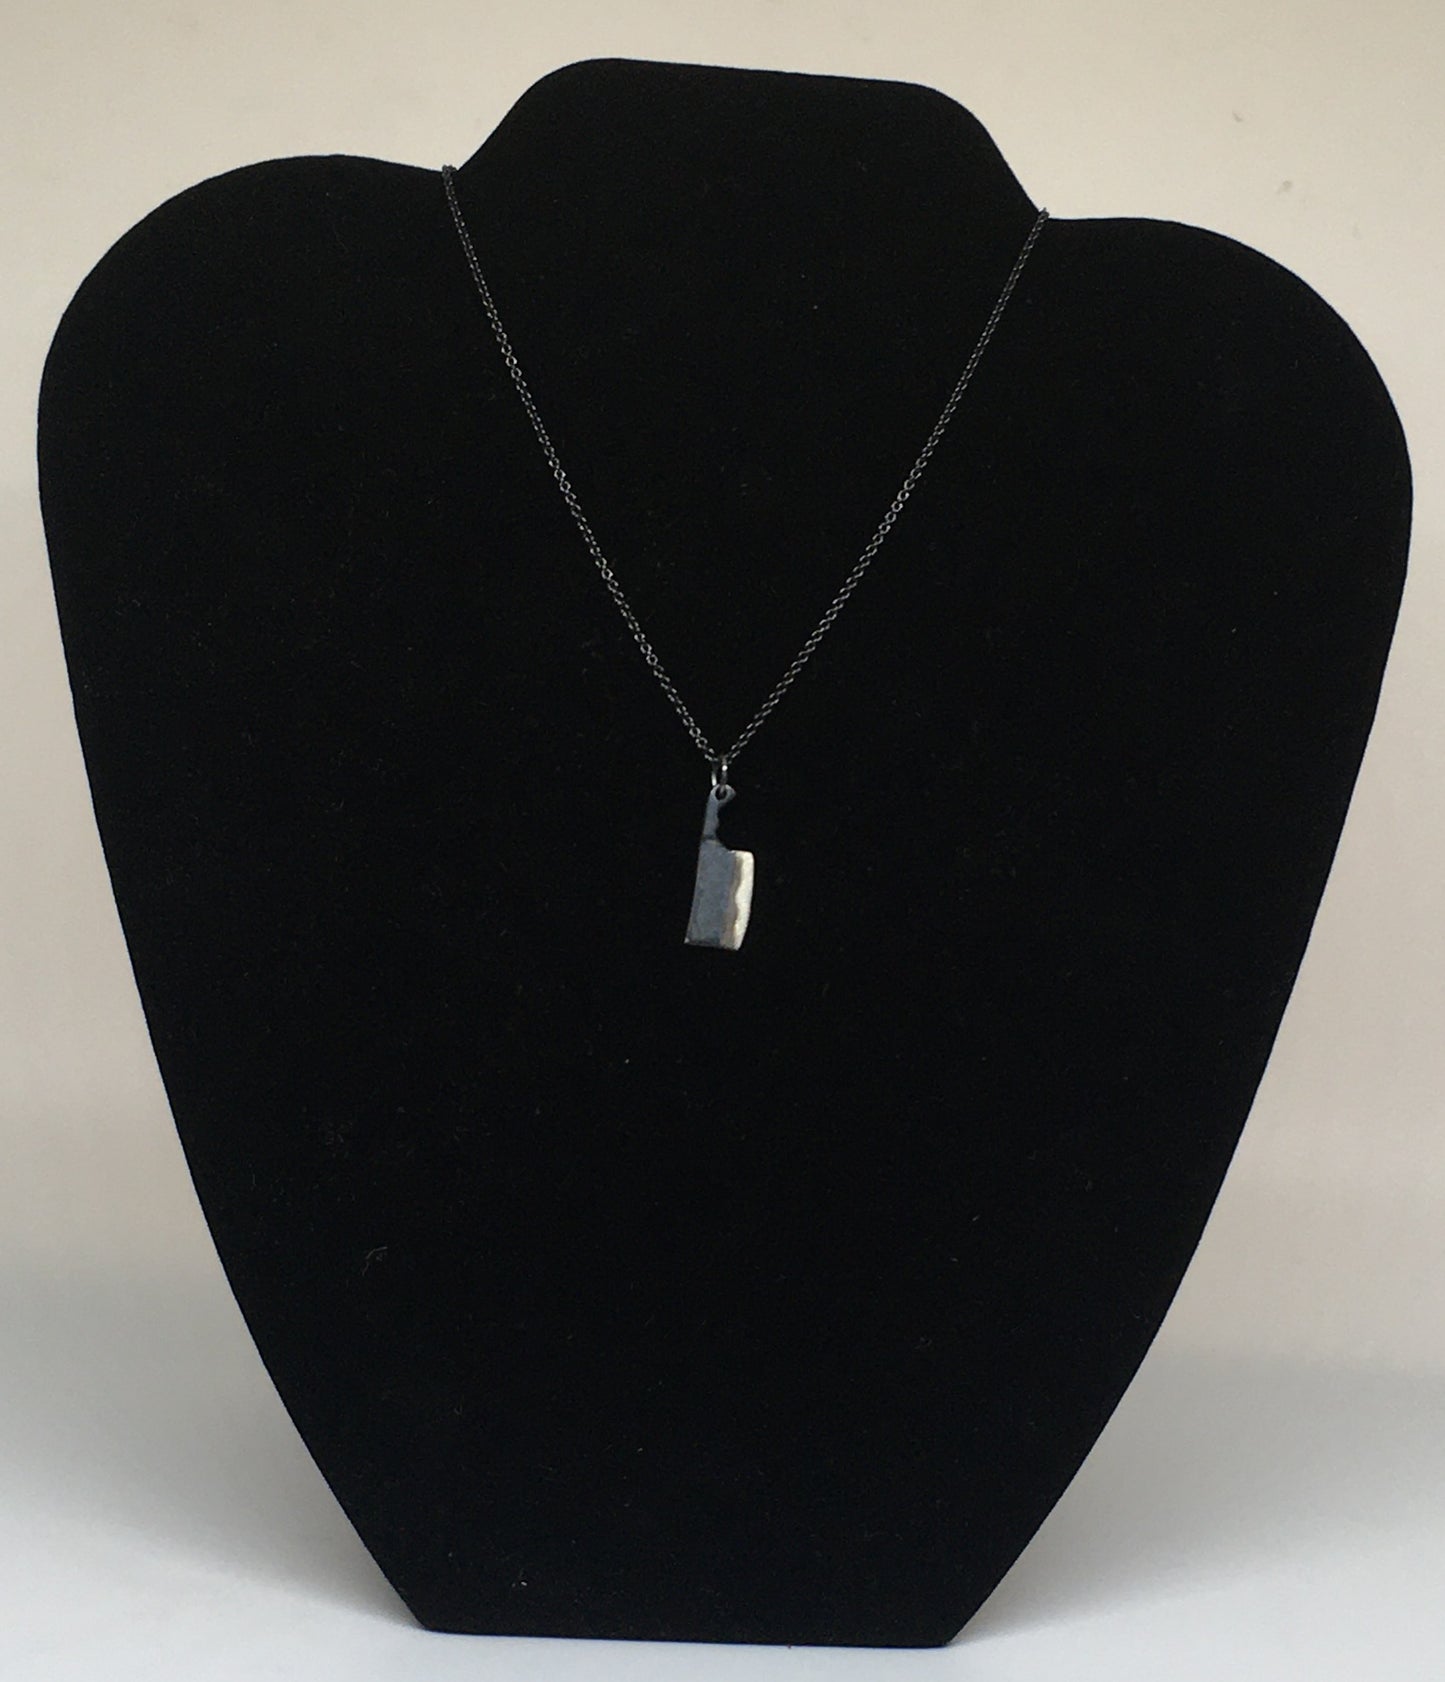 Chef Black Cleaver Knife Pendant Necklace with Black Silver Chain